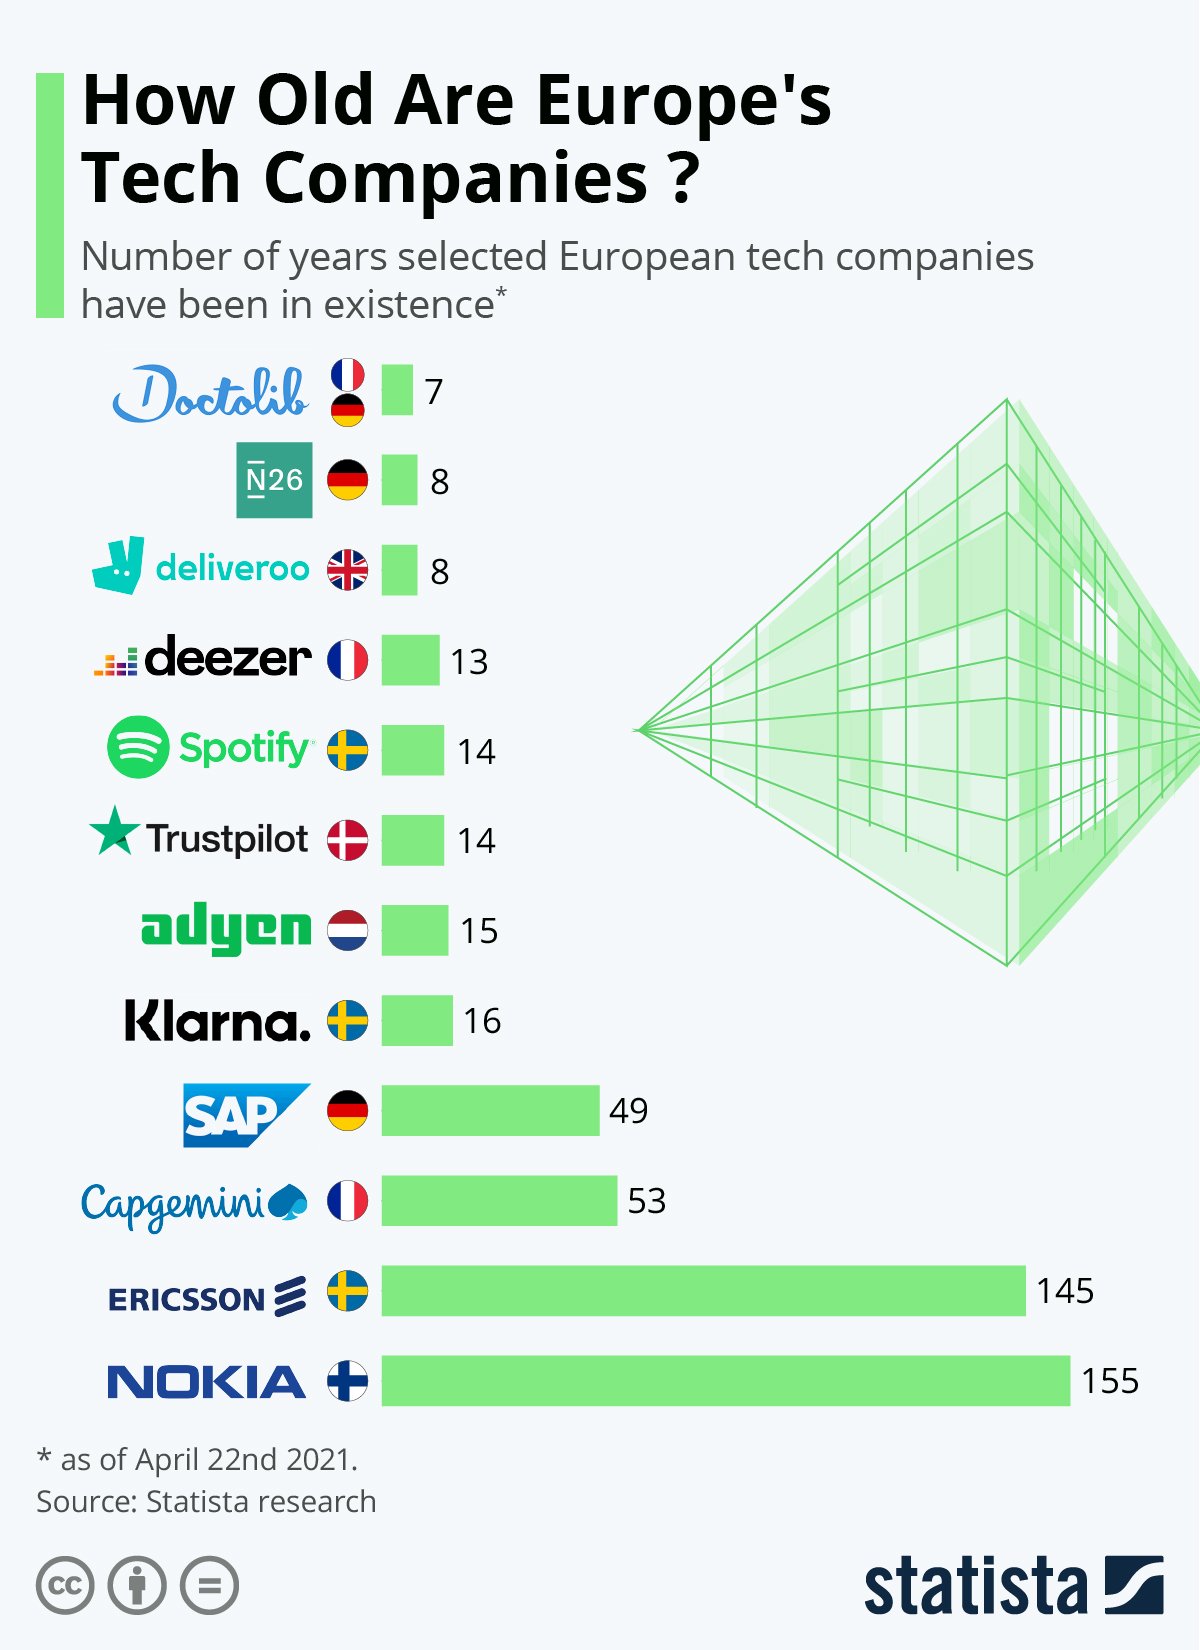 How old are European tech companies?